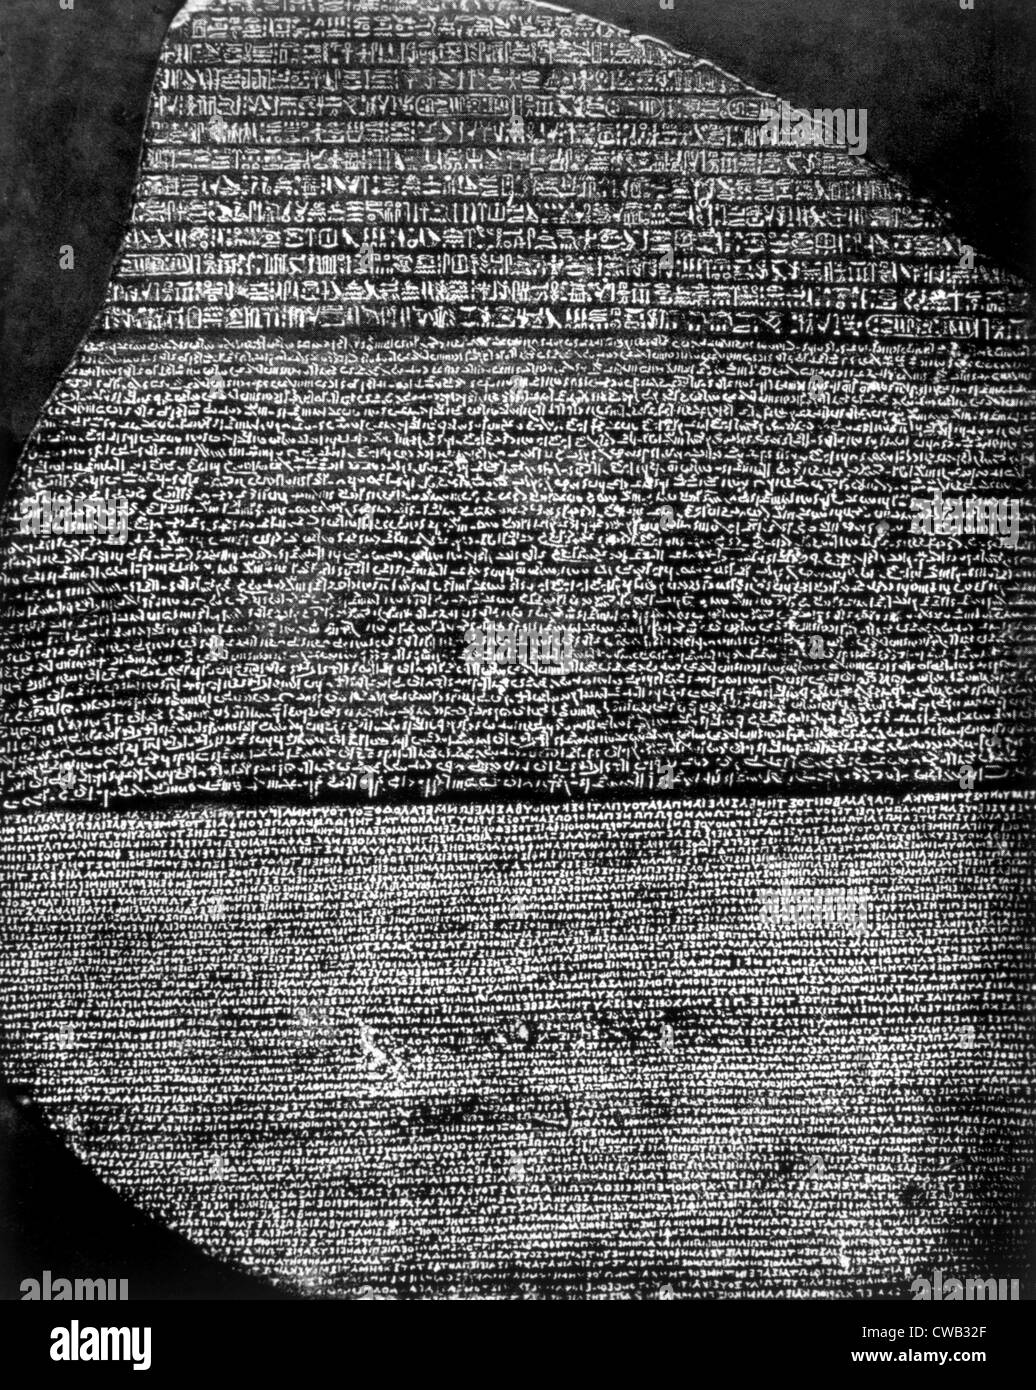 The Rosetta Stone, Basalt slab inscribed by priests of Ptolemy V in hieroglyphics, demonic and Greek, found by Napoleon's Stock Photo